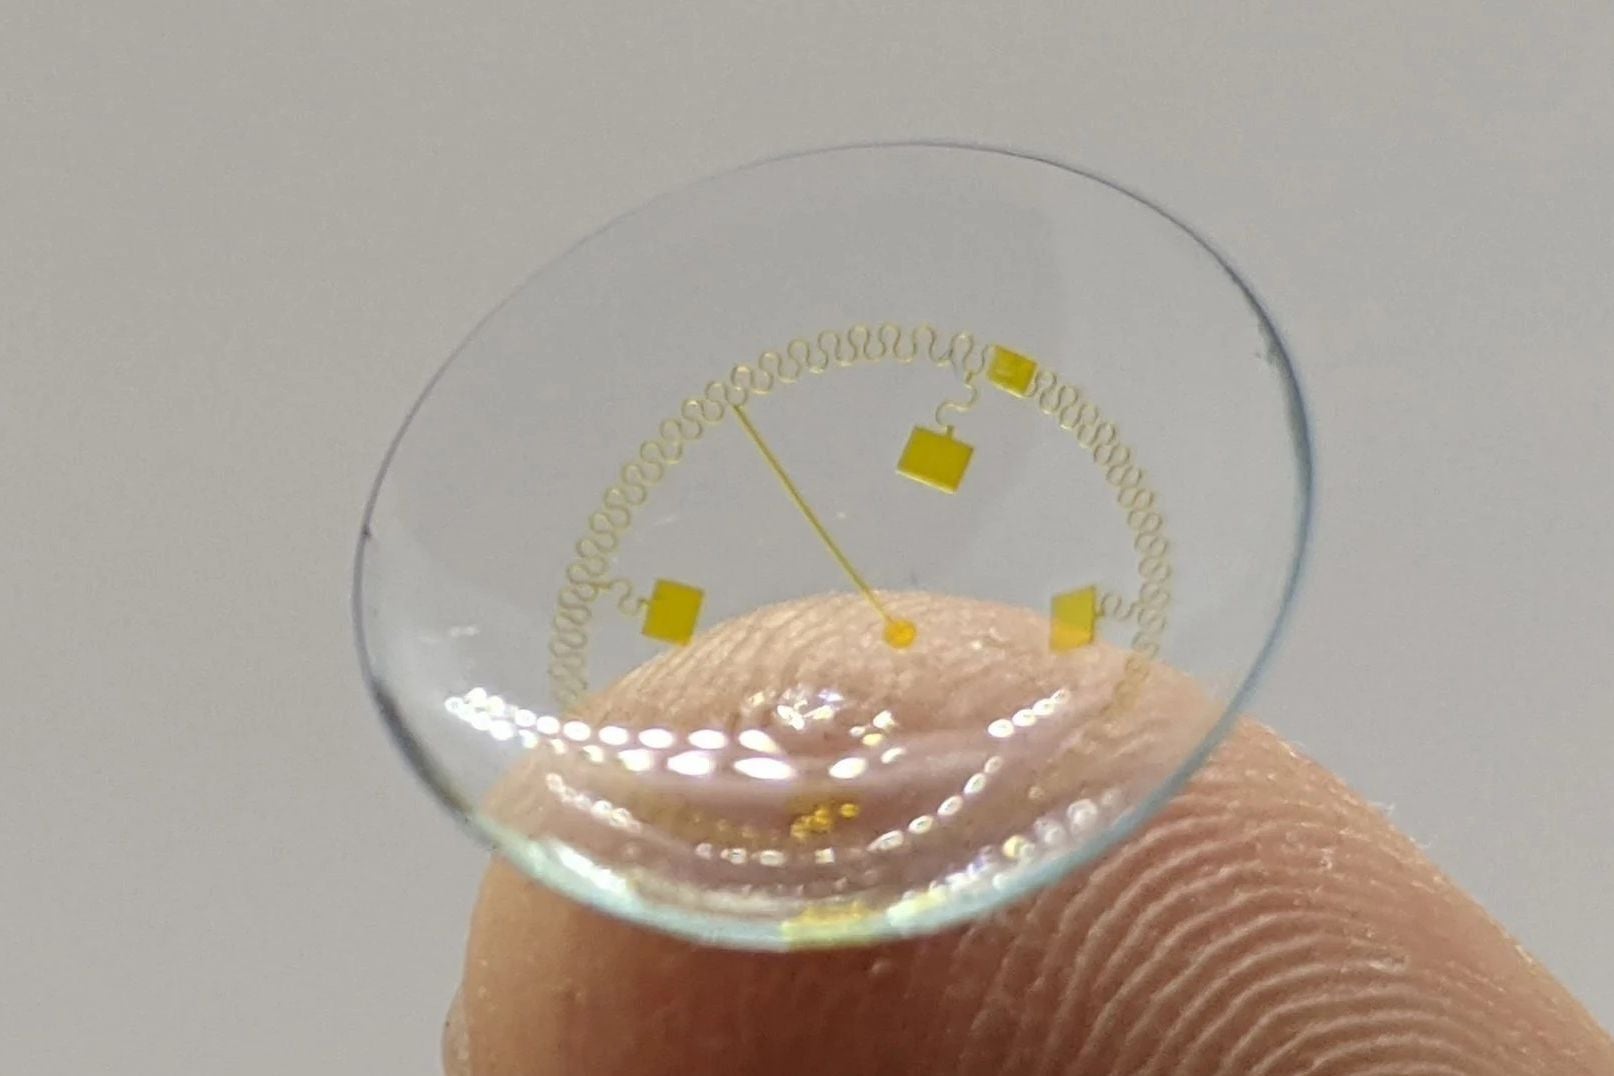 Smart contact lenses may arrive sooner than expected